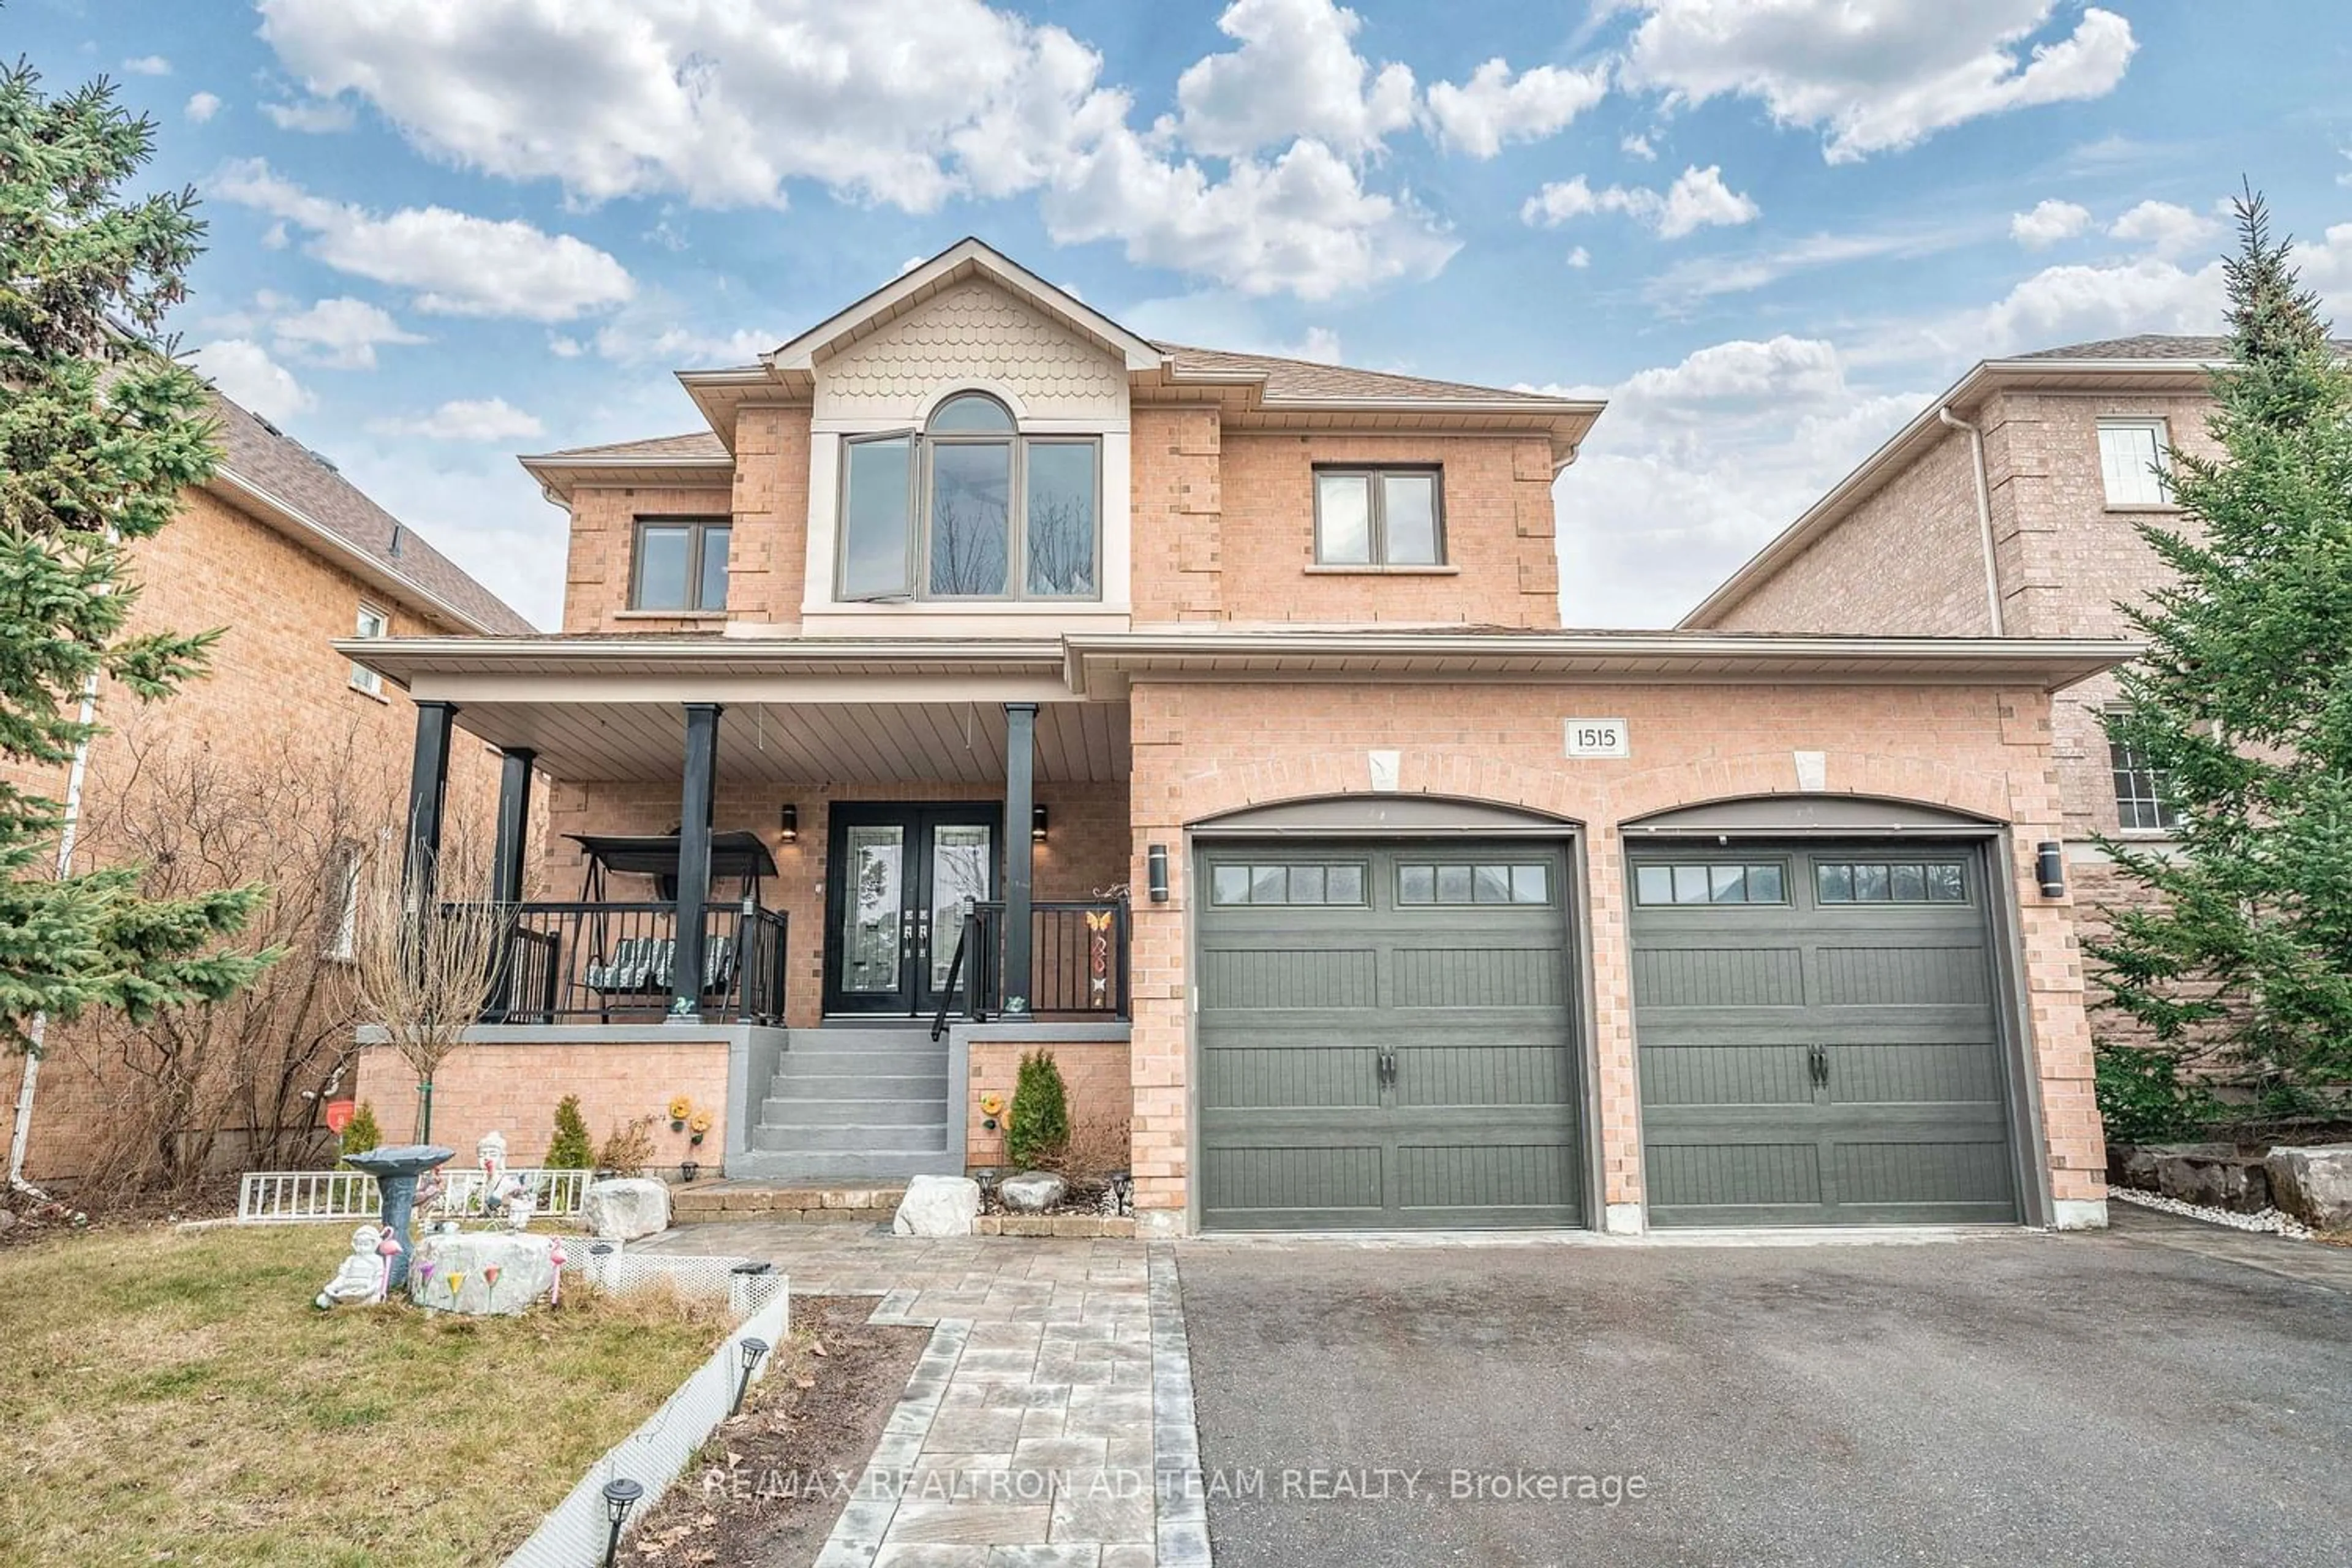 Home with brick exterior material for 1515 Clearbrook Dr, Oshawa Ontario L1K 2S3